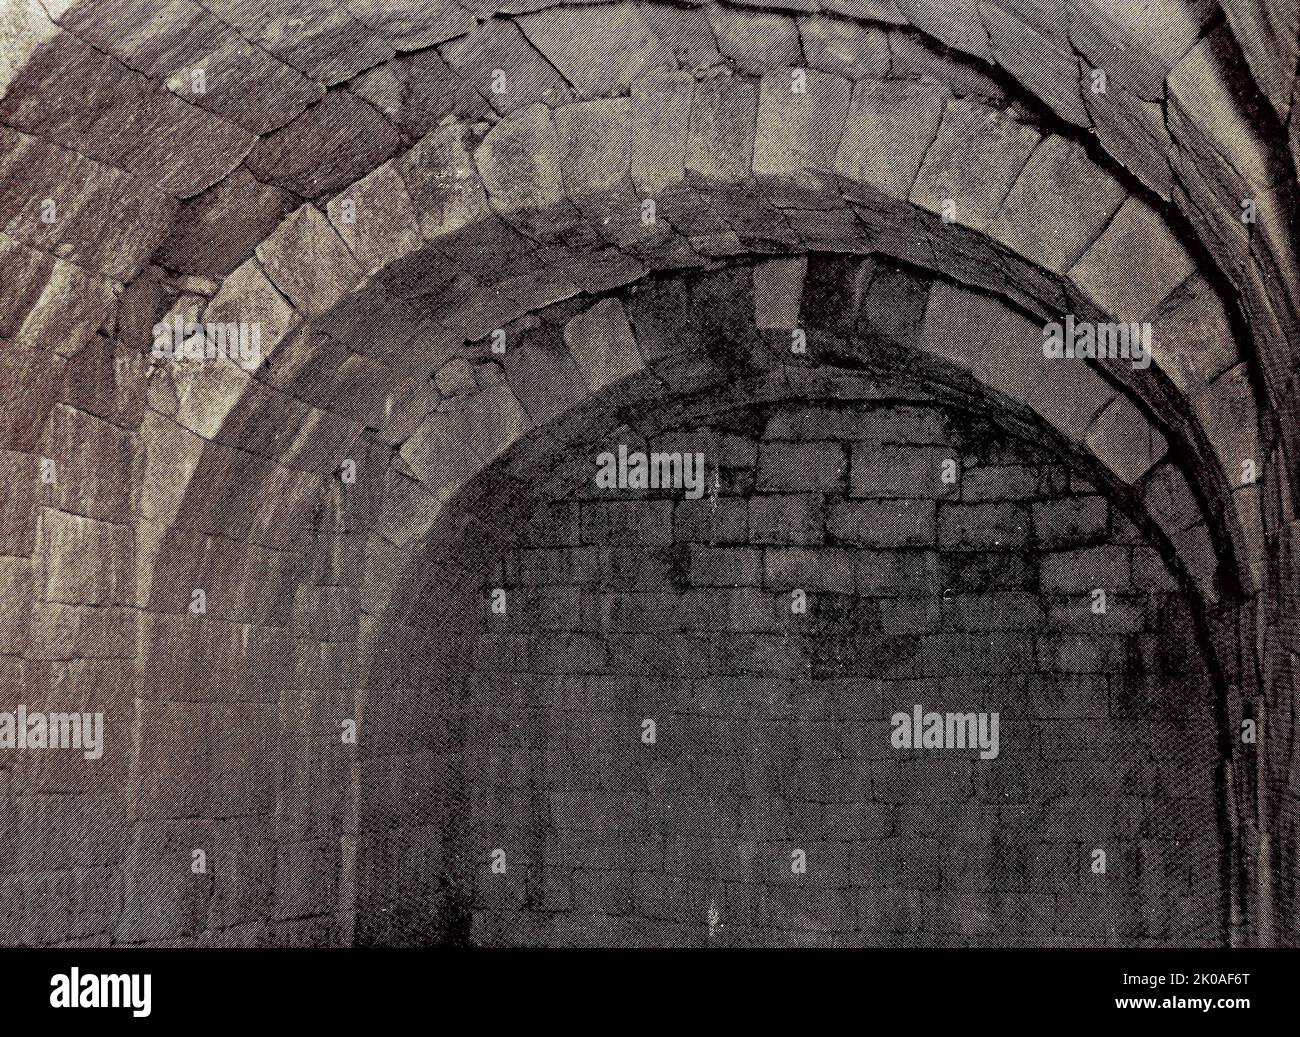 One of the oldest ice storages in the world, made of granite. There are ventilators on the vaulted ceiling and draining arrangement in the center of floor. Made in early Silla dynasty (57 BCE - 668) and rebuilt inCE 174. Kyongju, South Korea. Stock Photo